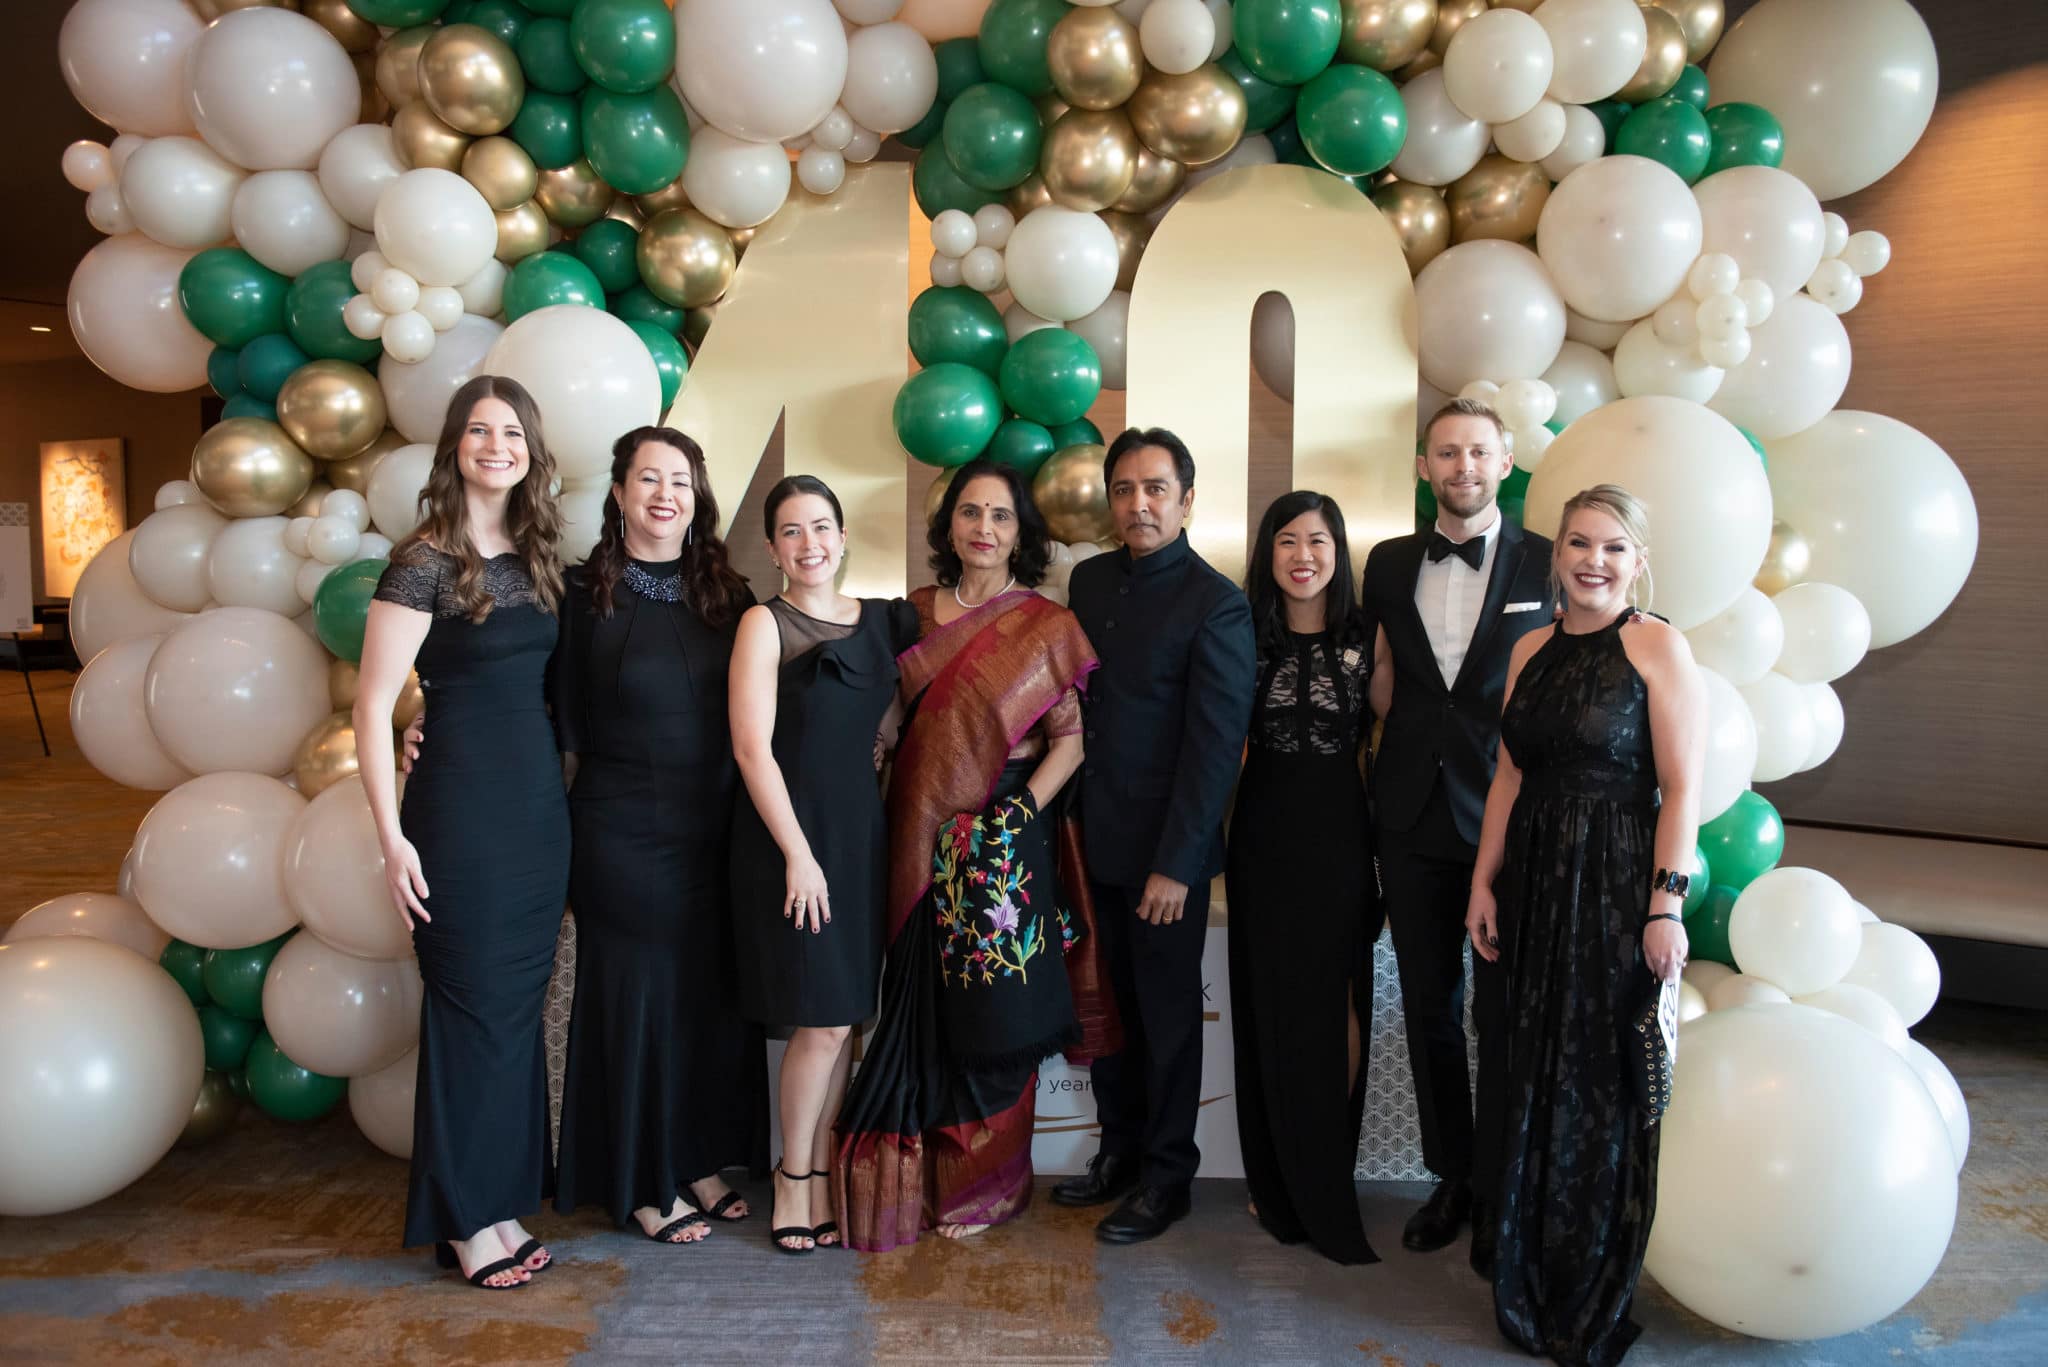 North Texas Food Bank staff members with Anna and Raj Asava at the Harvest 40th anniversary celebration